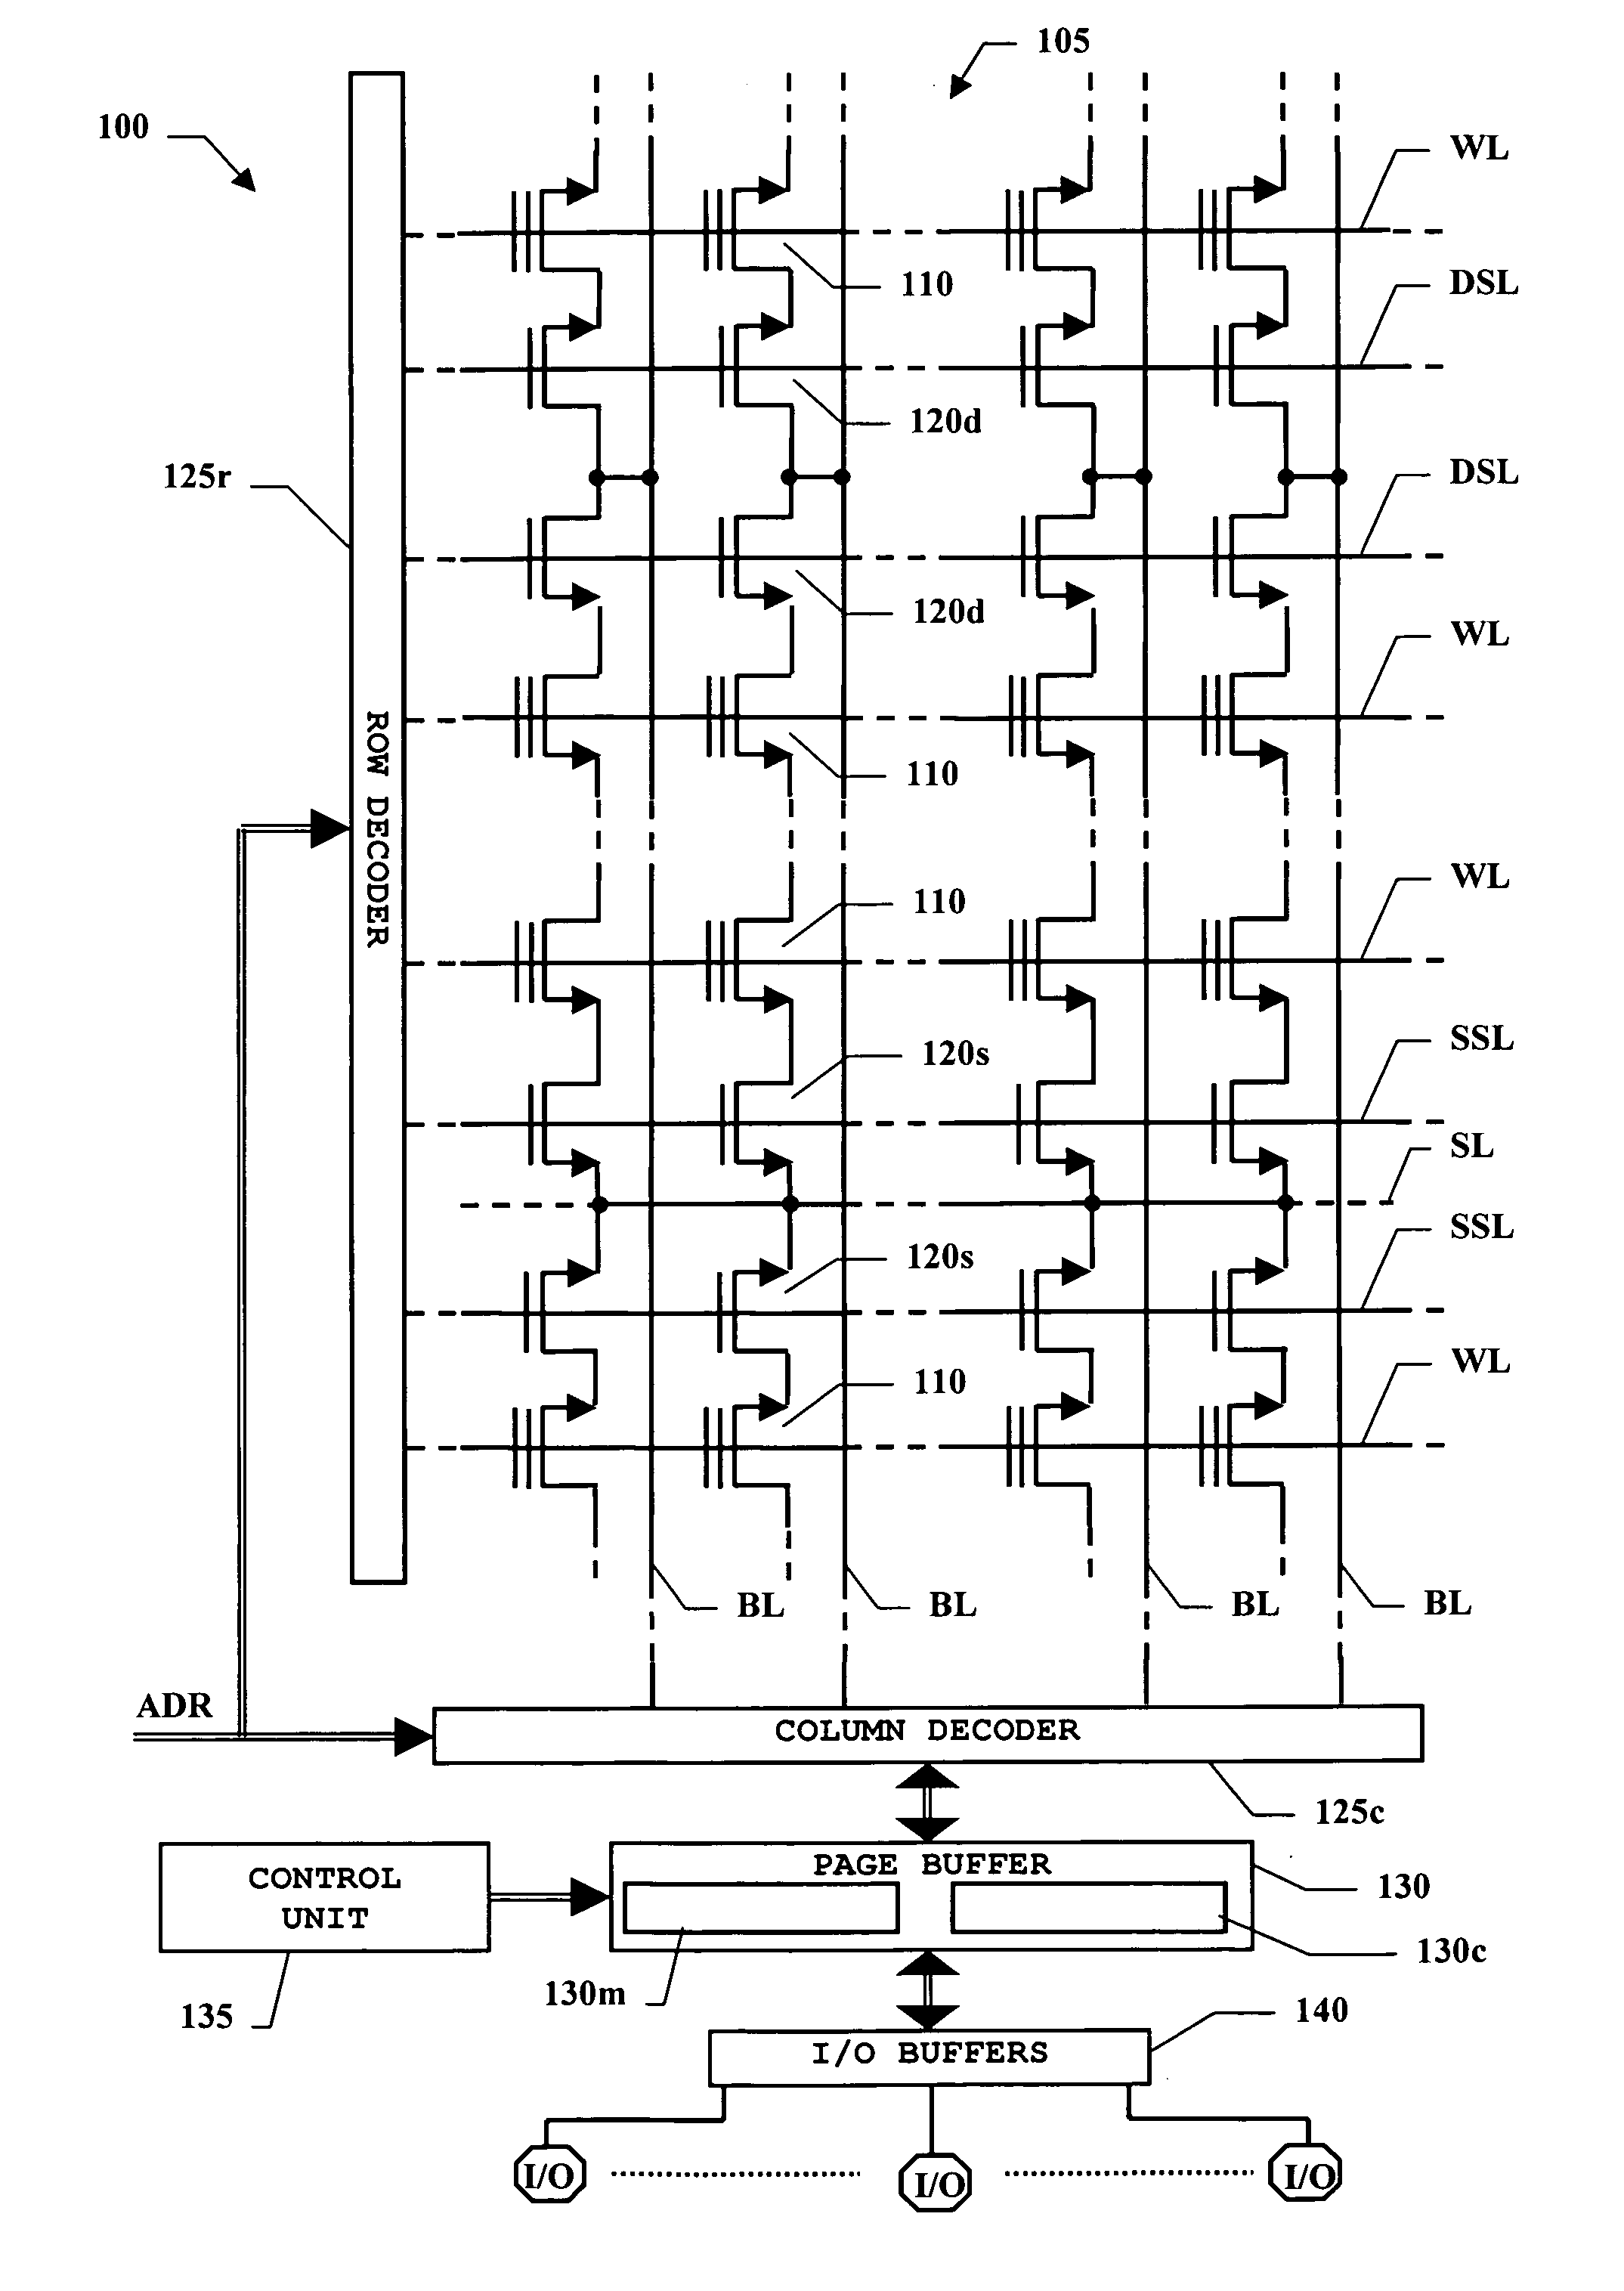 Page buffer for a programmable memory device